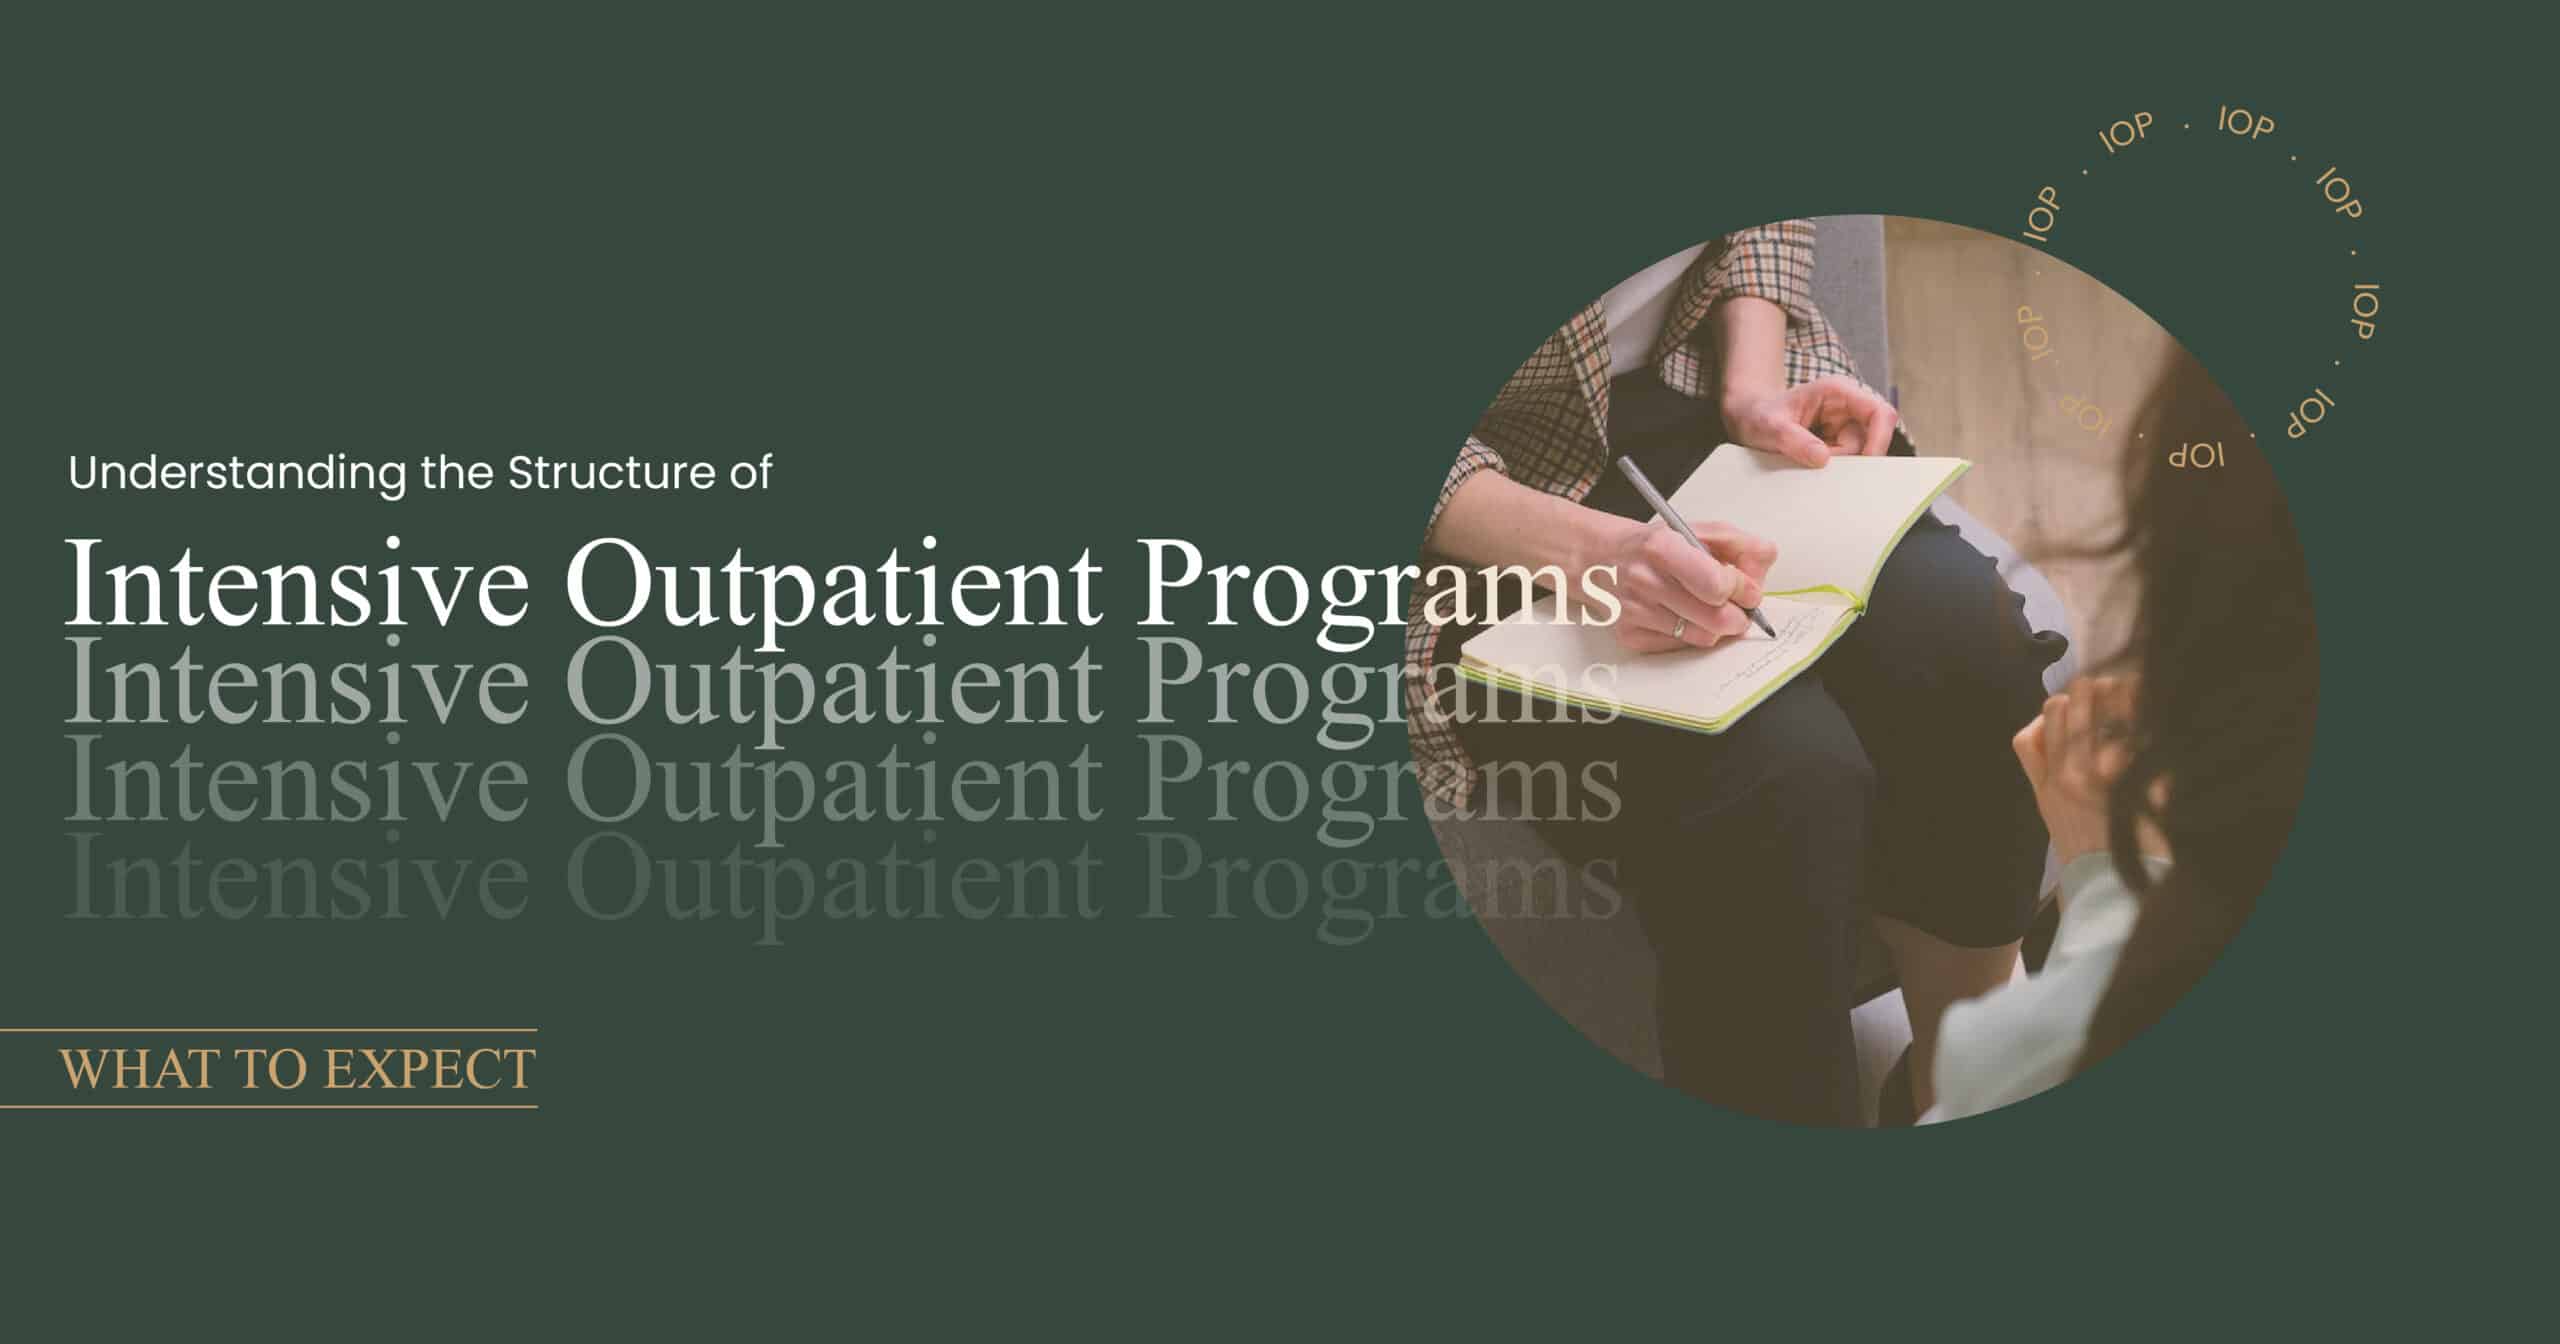 Structure of Intensive Outpatient Programs